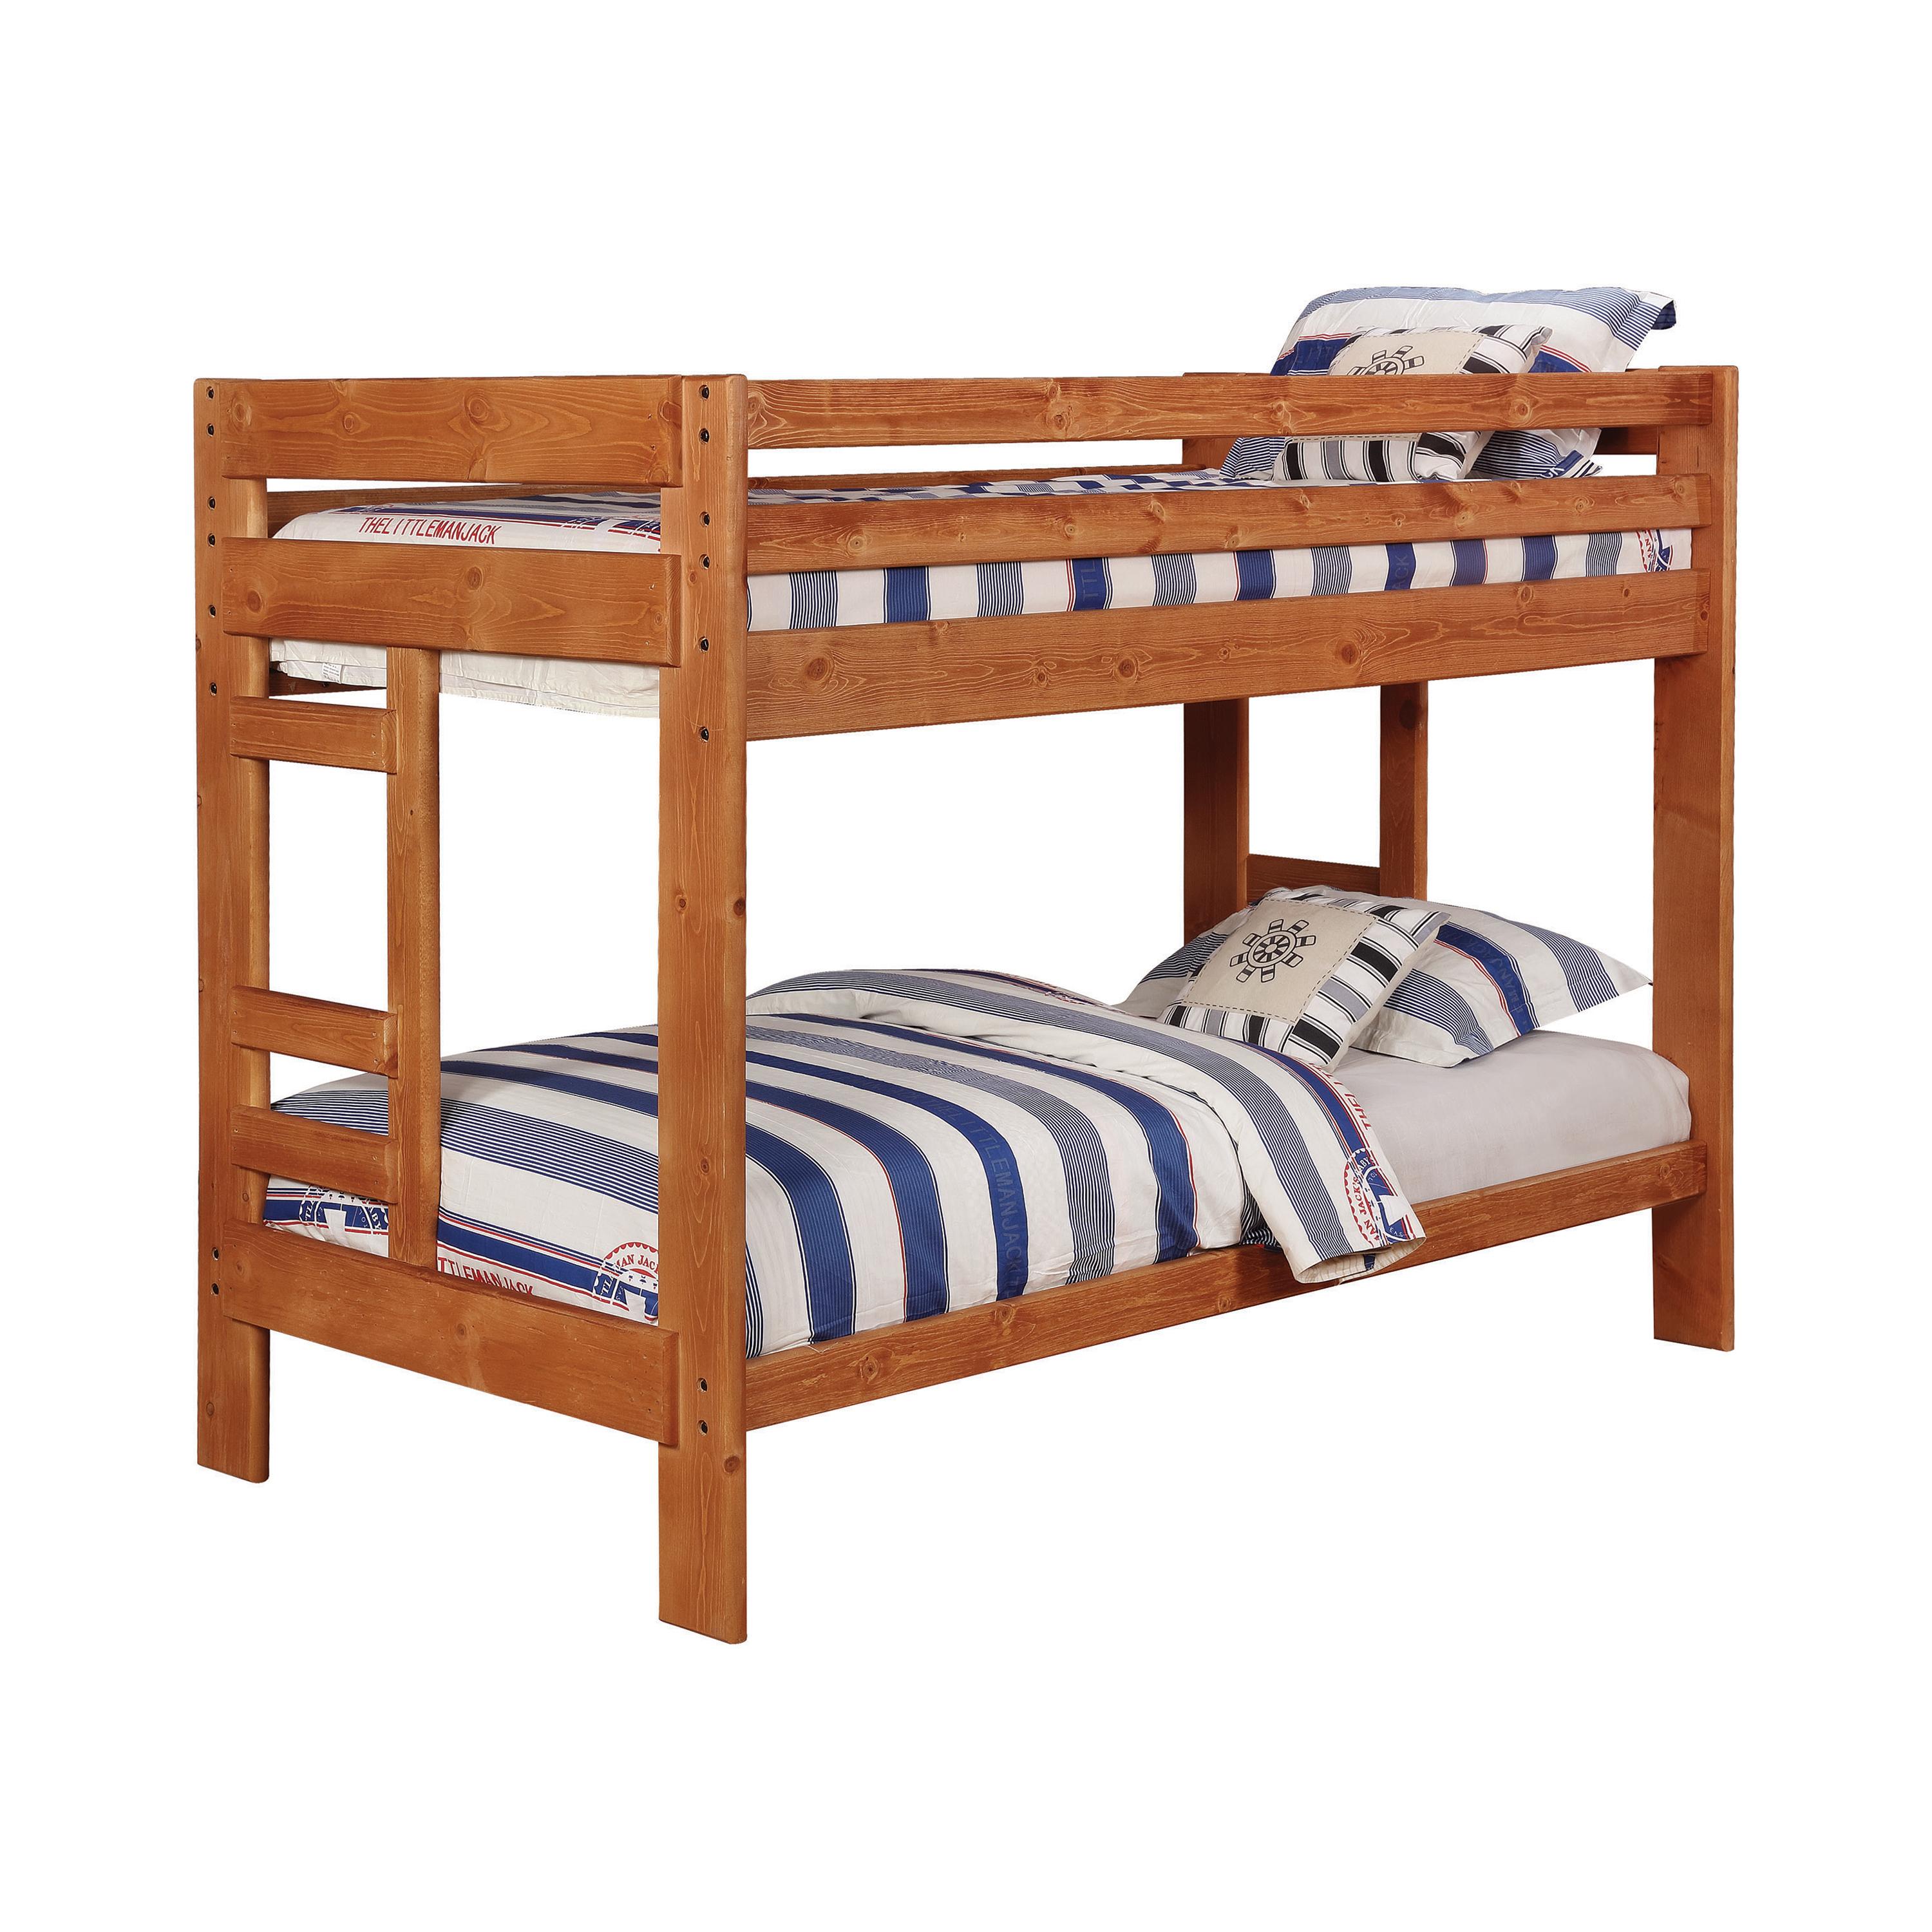 Transitional Bunk Bed 460243 Wrangle Hill 460243 in Amber 